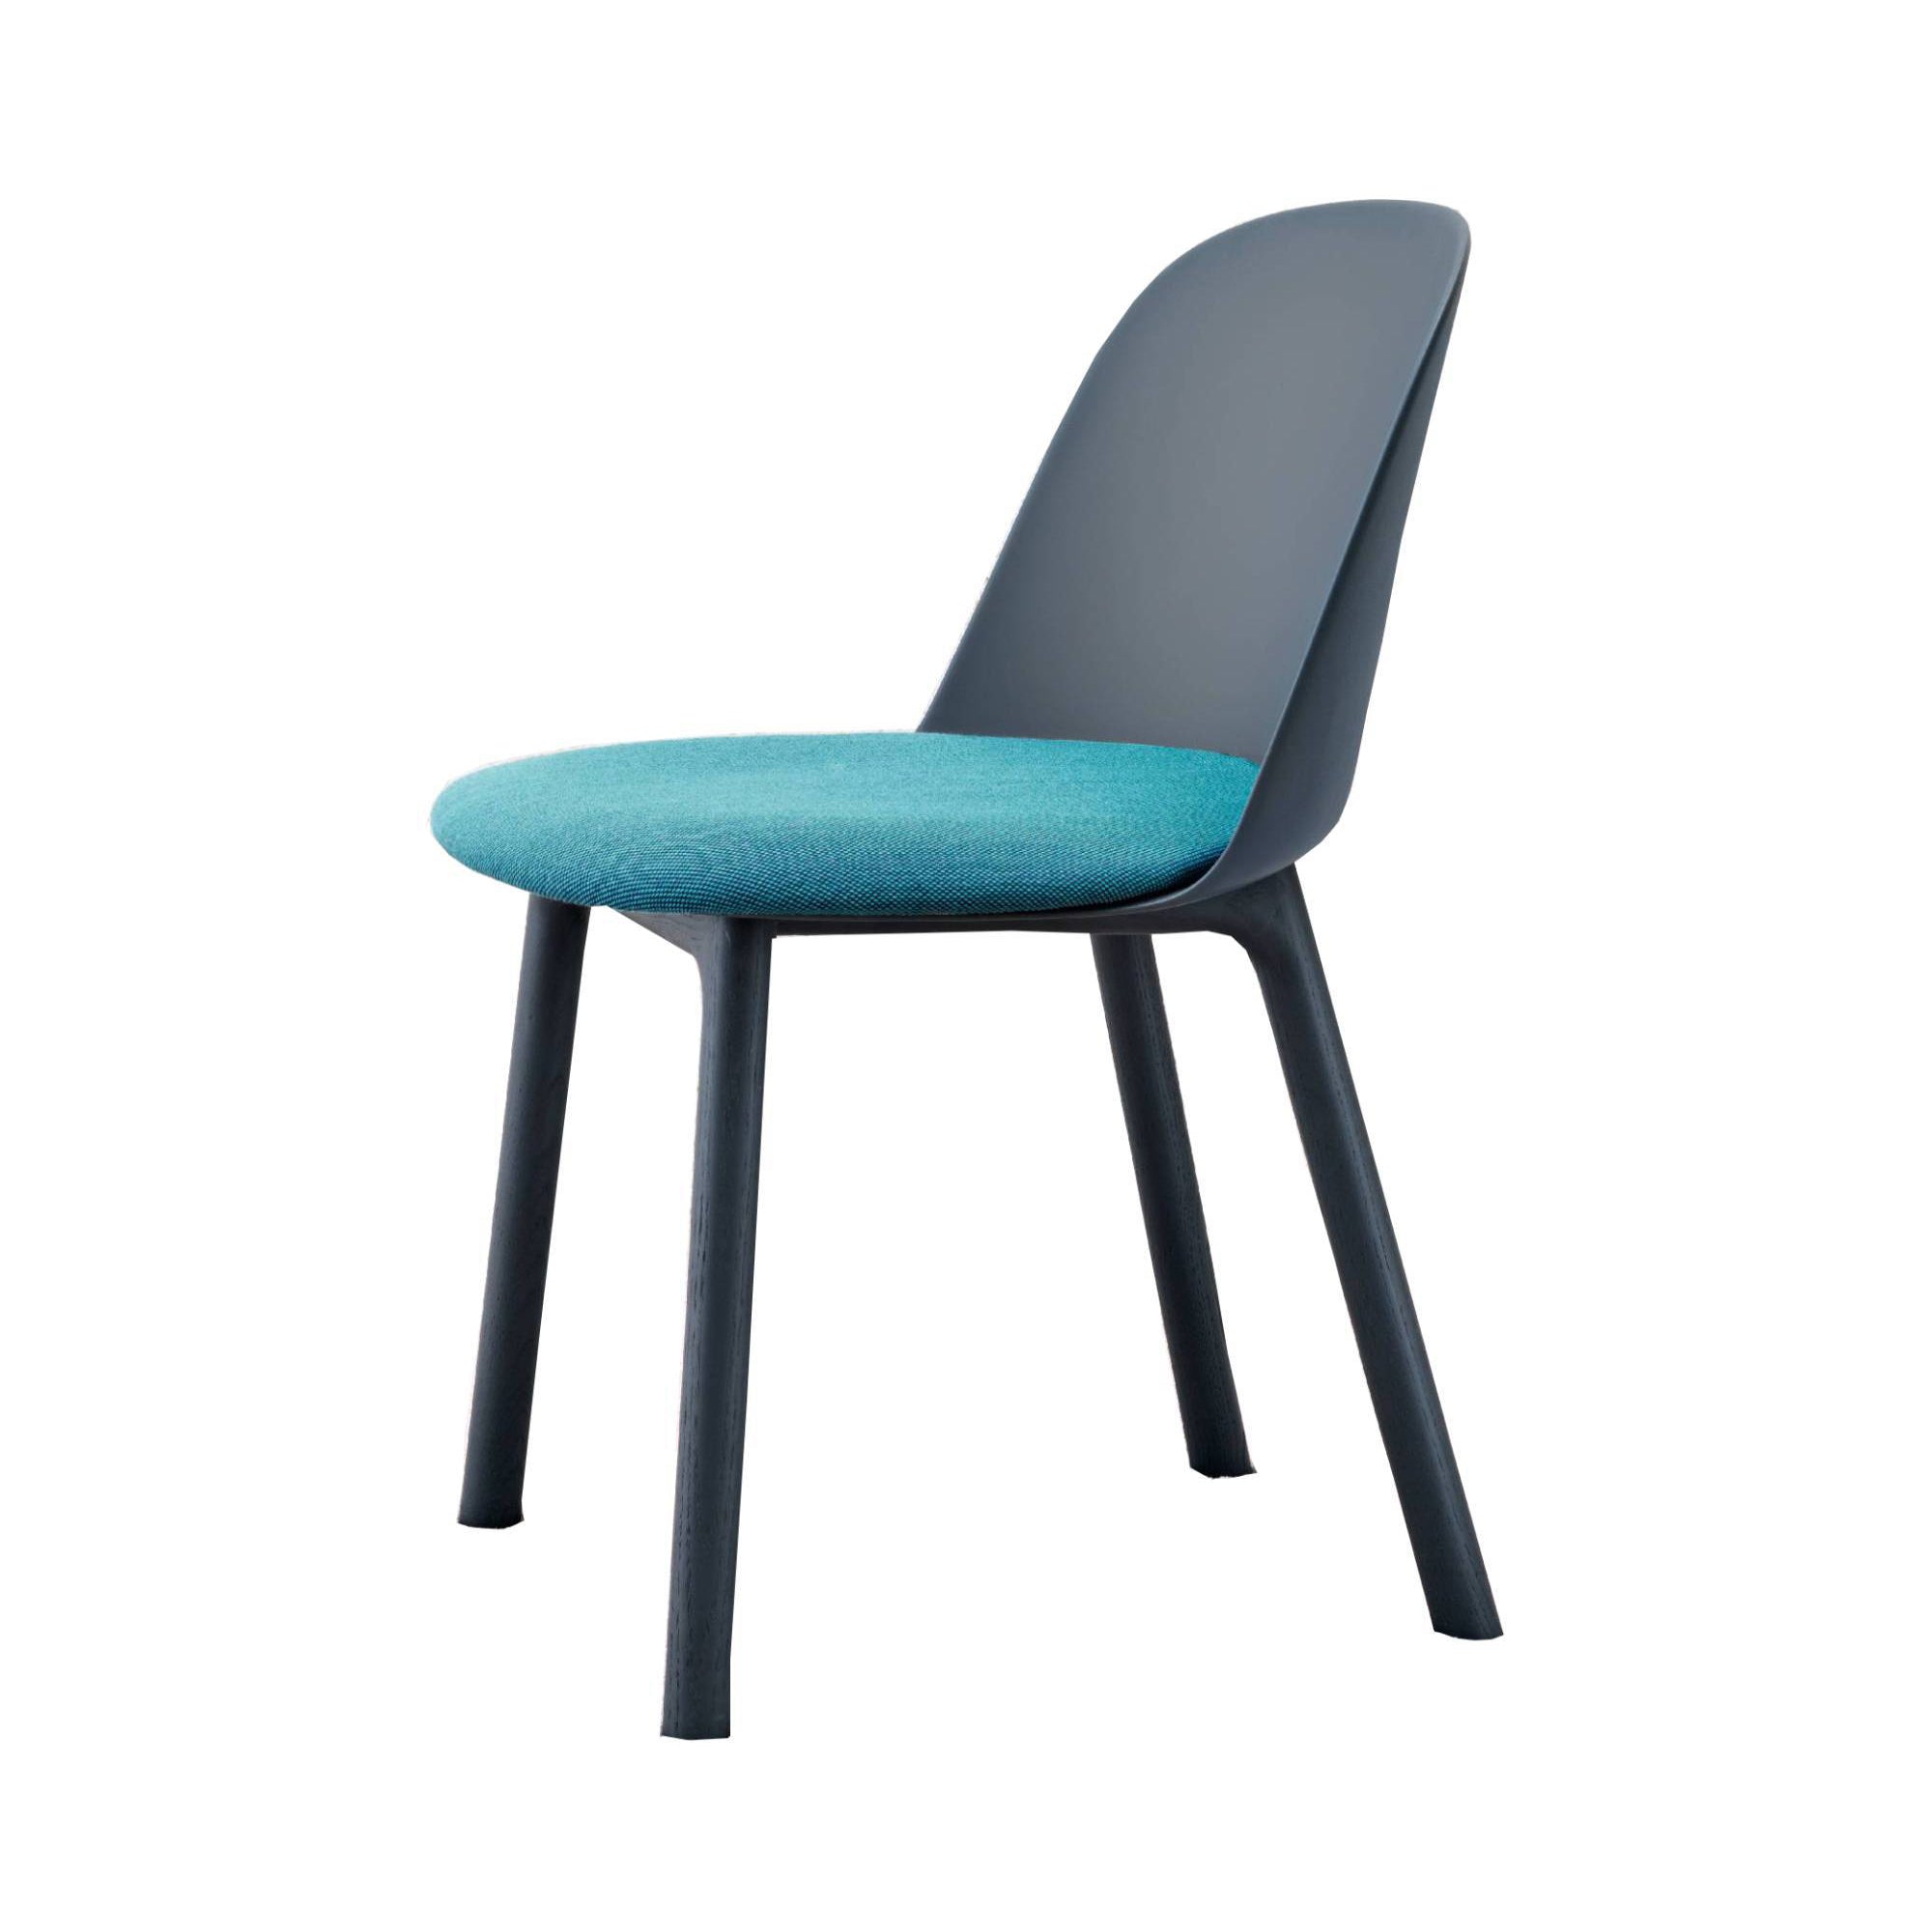 Mariolina Side Chair: Wood Base + Upholstery + Black Ash + Anthracite